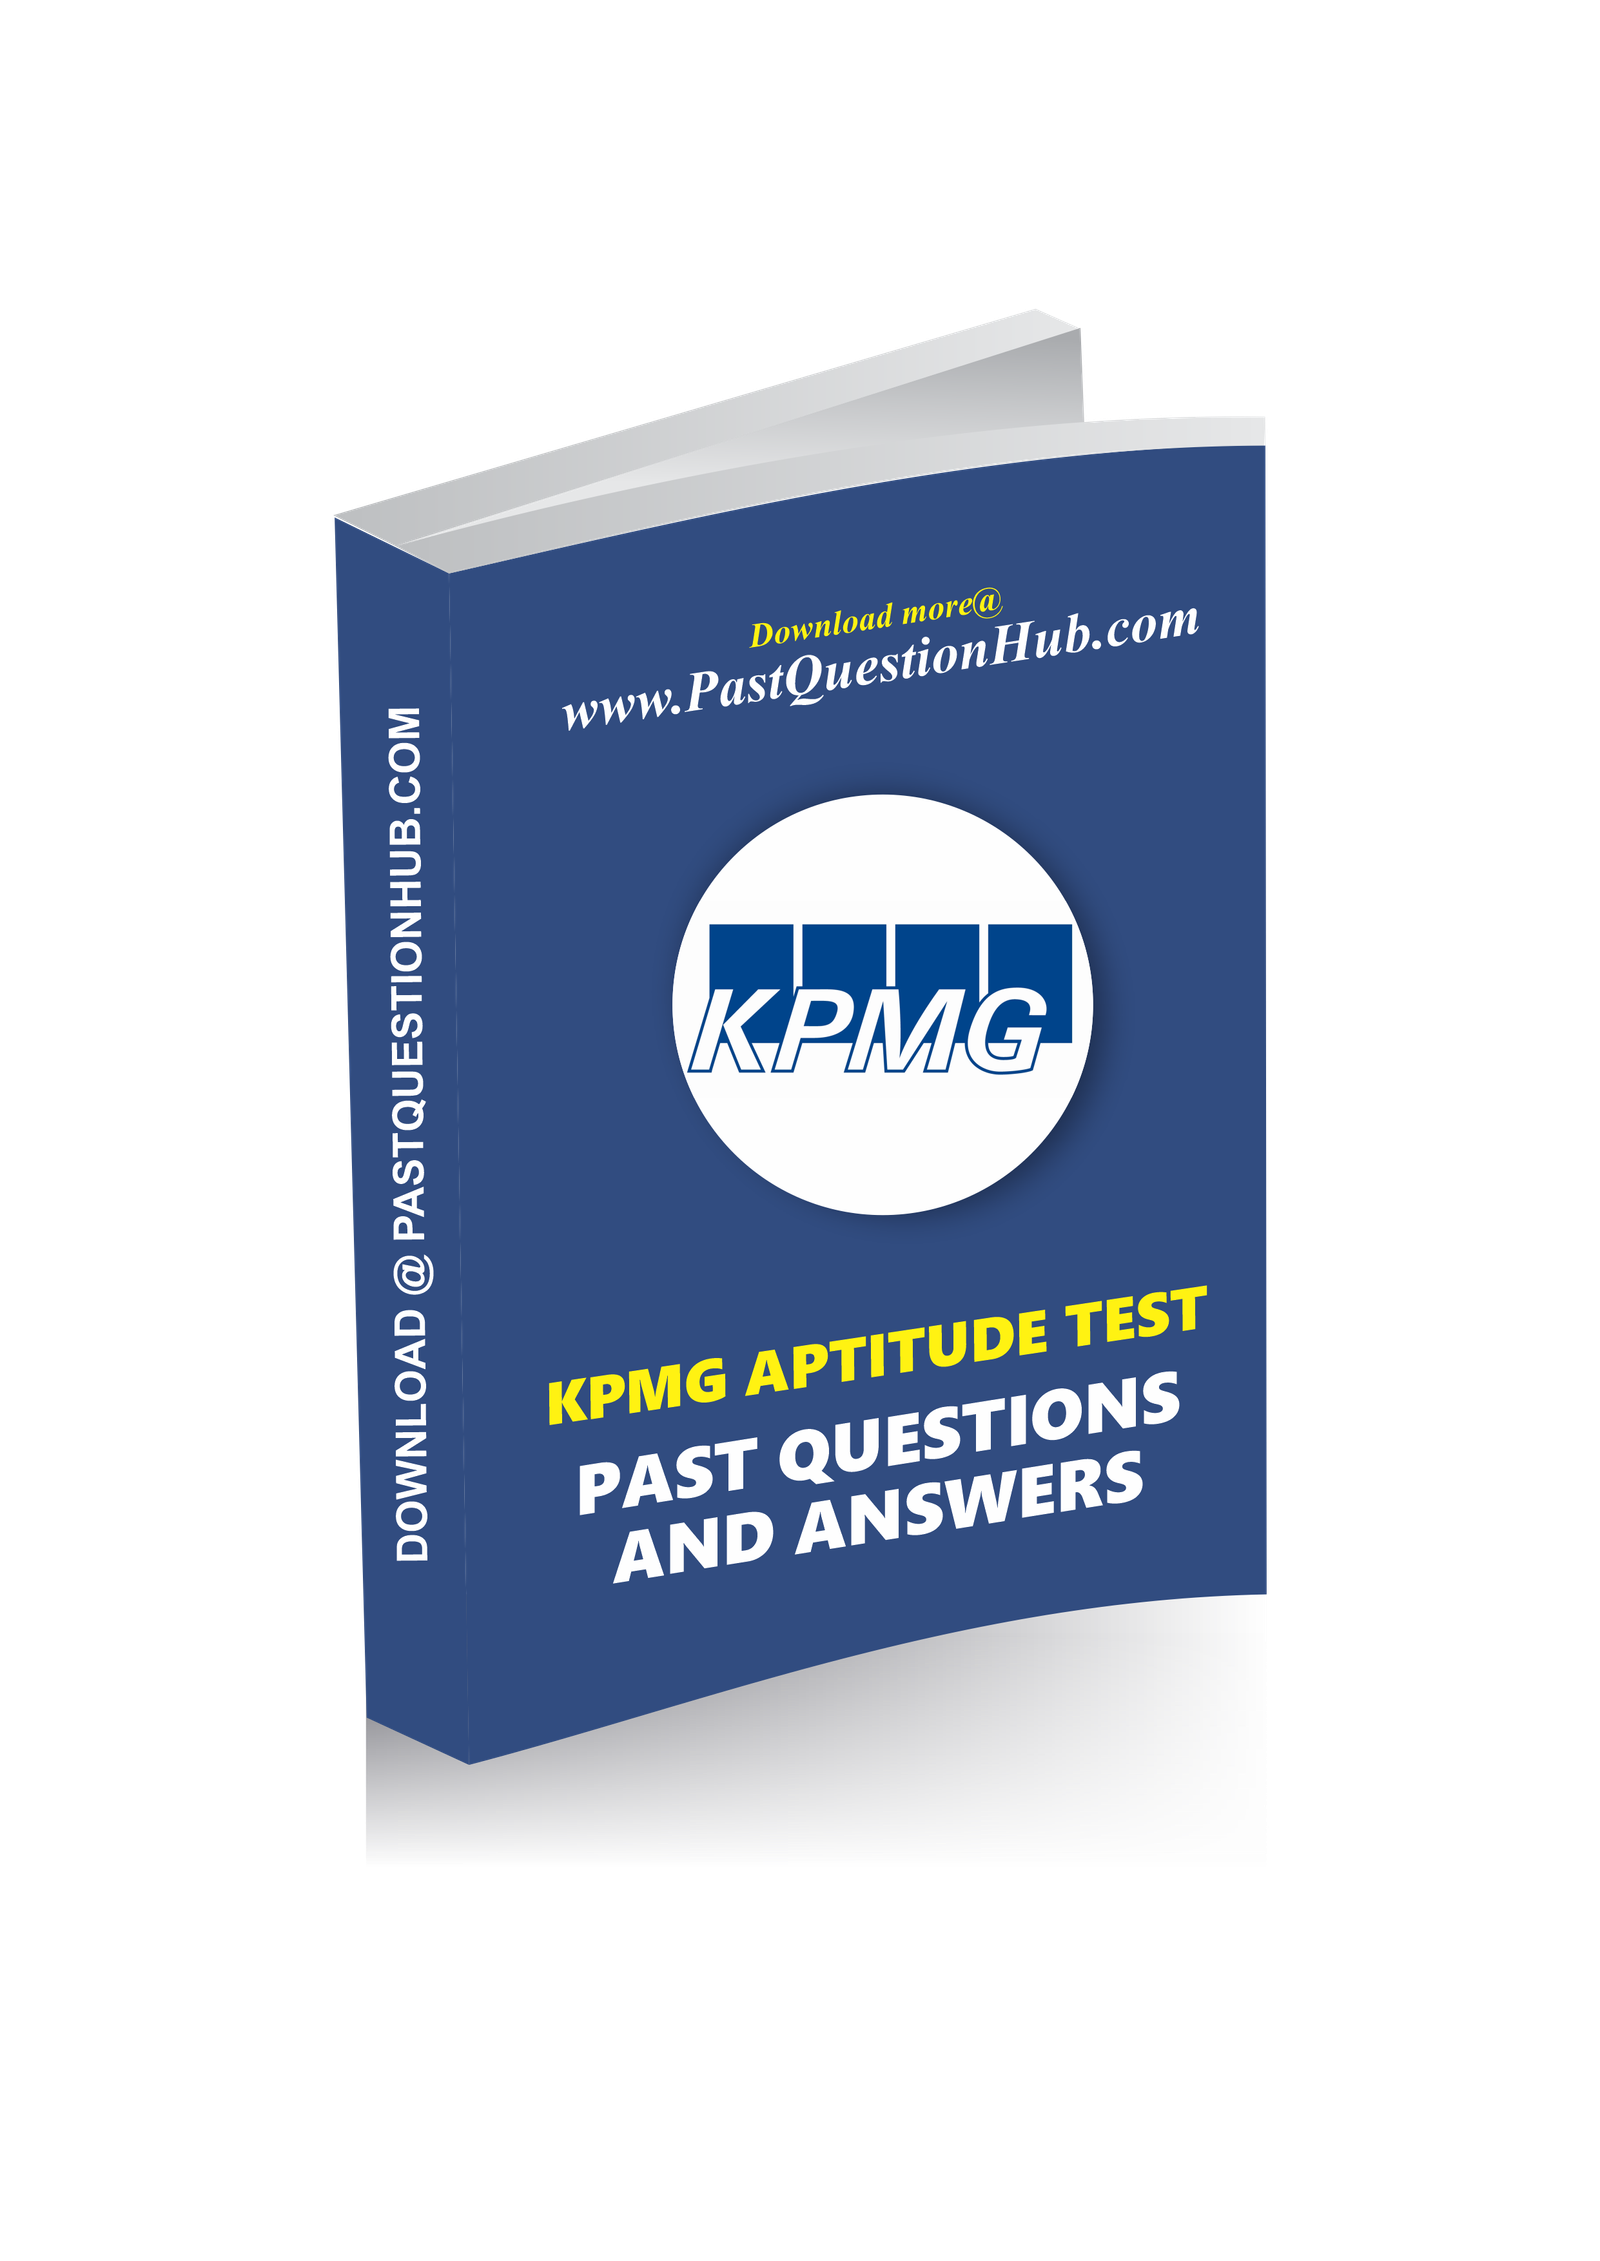 nerc-aptitude-test-nerc-past-questions-and-answers